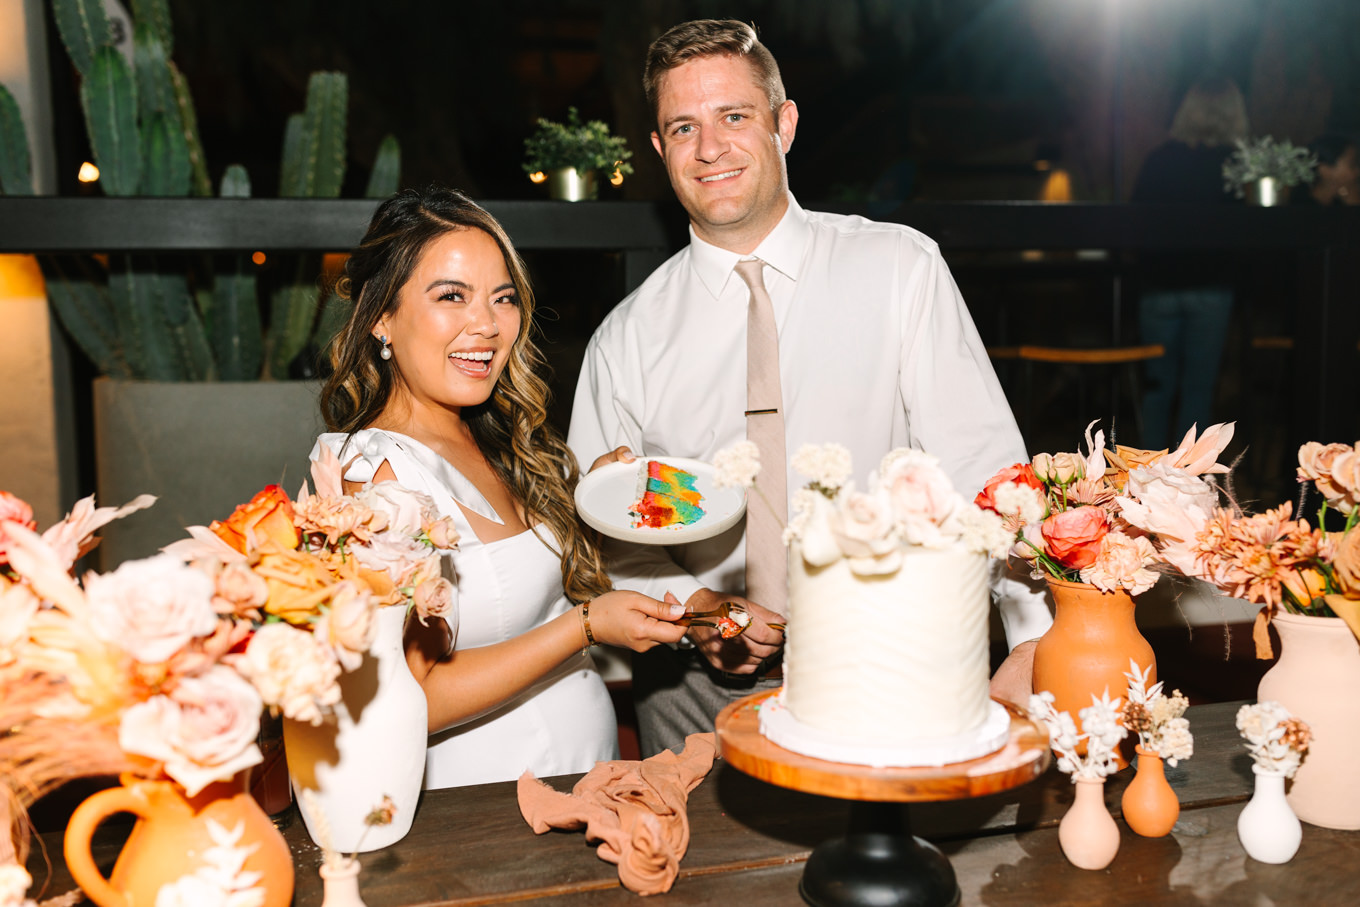 Rainbow surprise in wedding cake | Pink and orange Lautner Compound wedding | Colorful Palm Springs wedding photography | #palmspringsphotographer #palmspringswedding #lautnercompound #southerncaliforniawedding  Source: Mary Costa Photography | Los Angeles